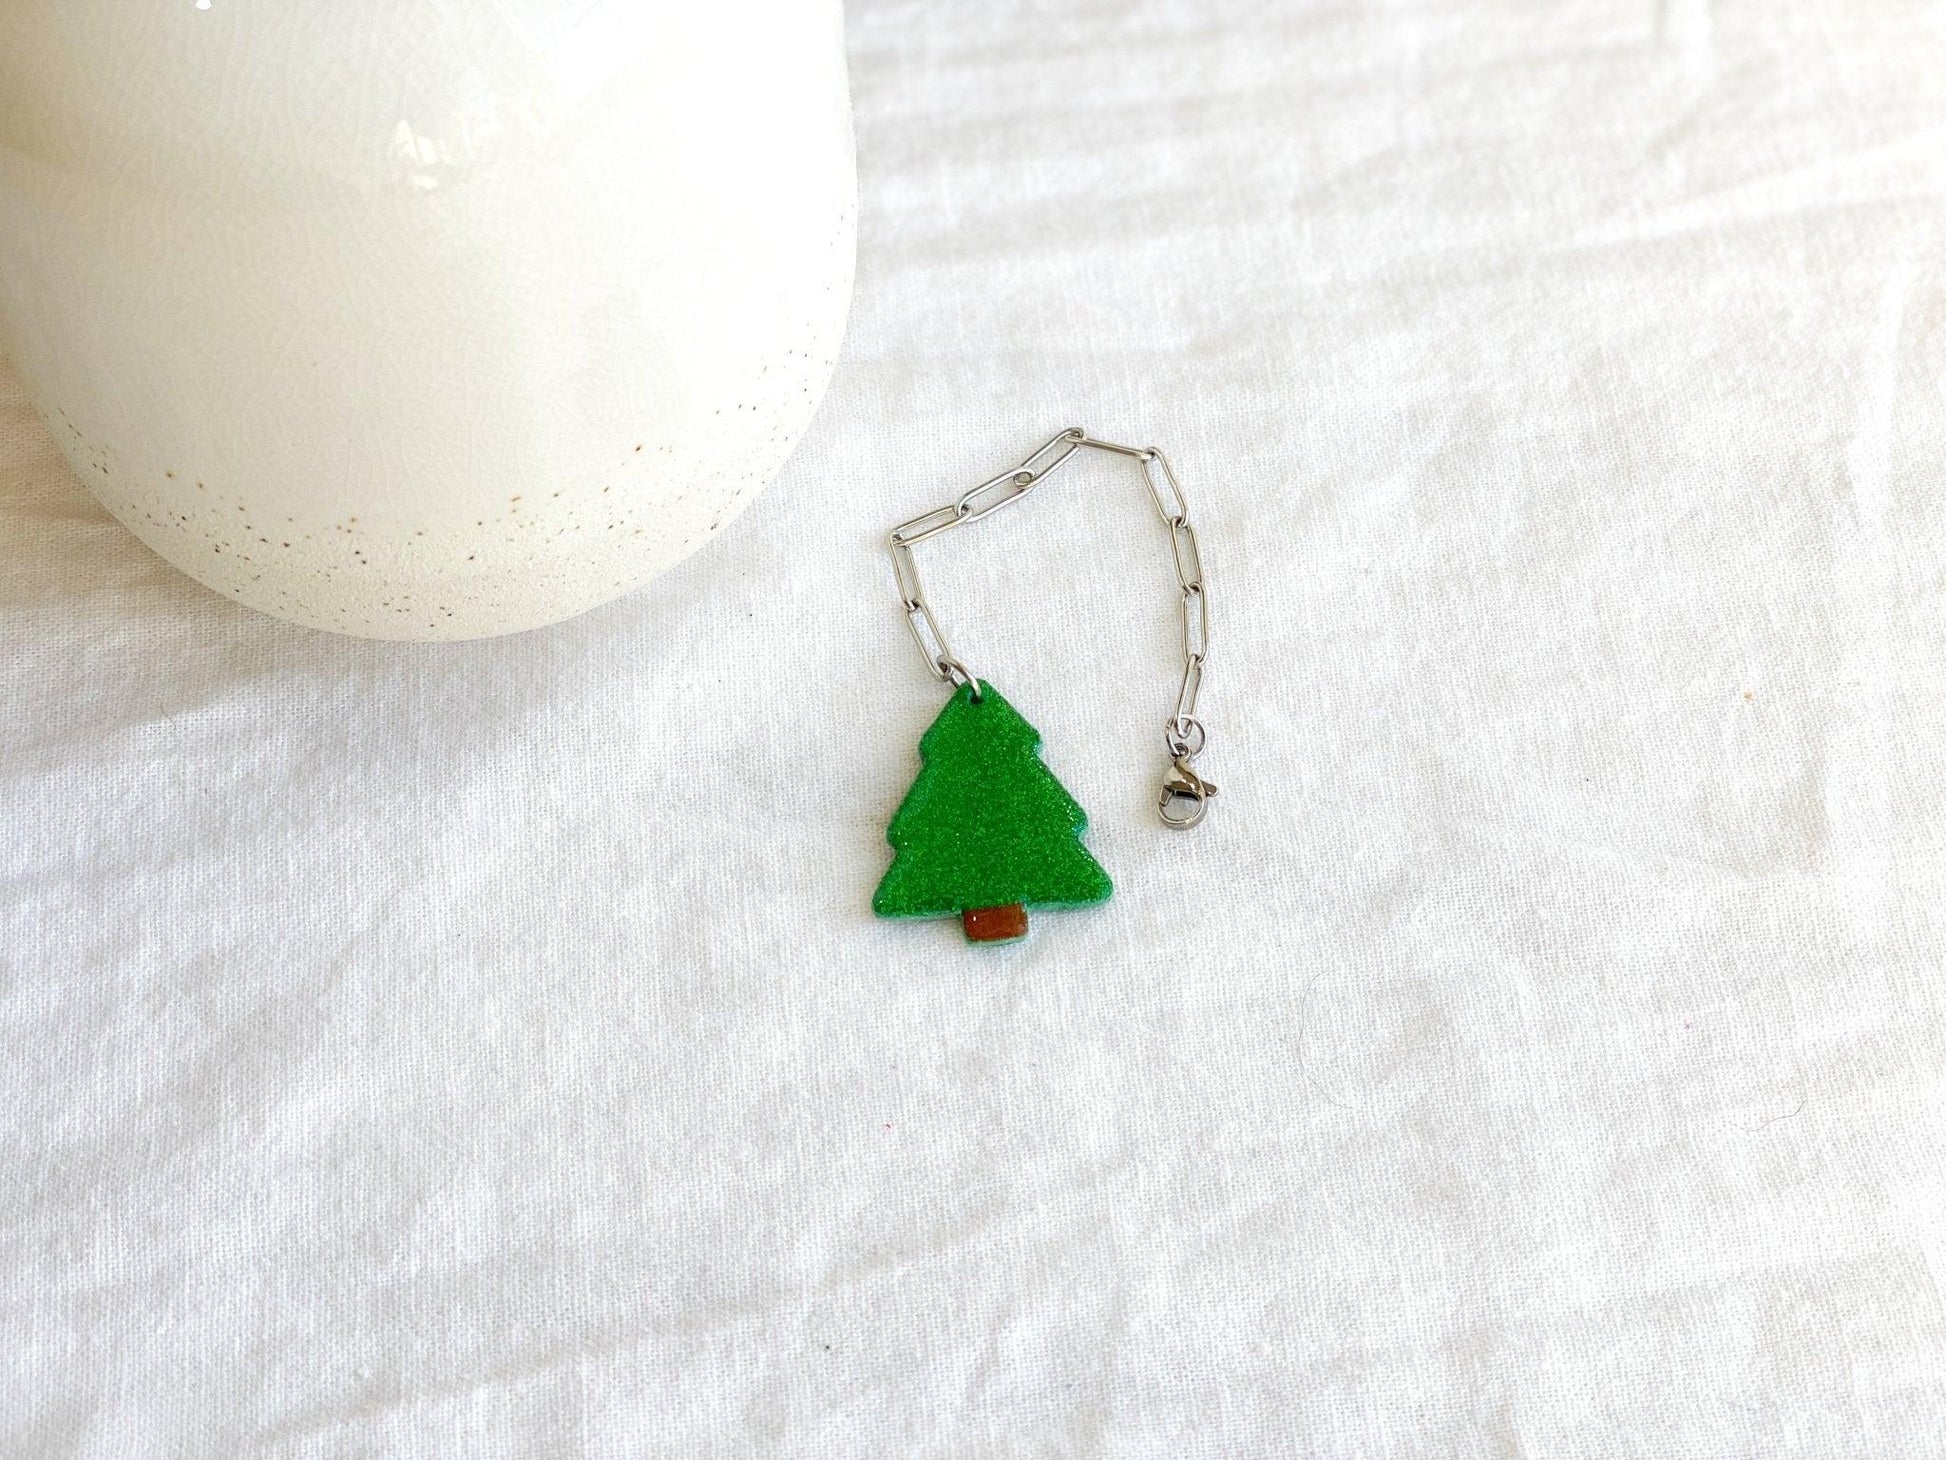 Sparkly Christmas Charm, Stanley Cup Accessories, Gifts for Women